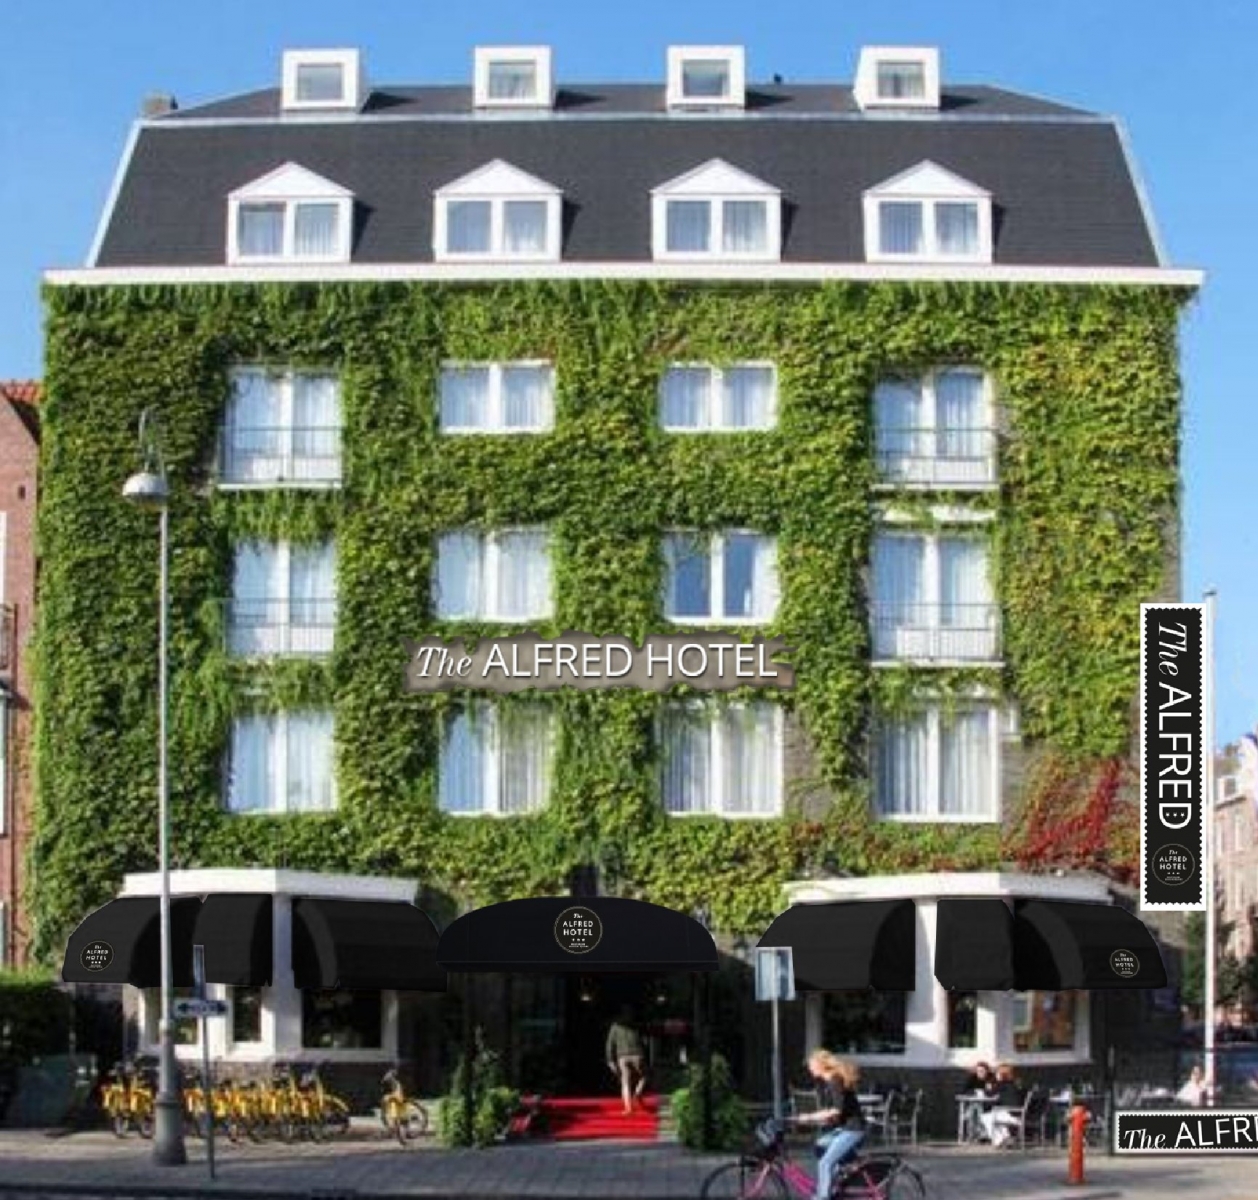 The Alfred Hotel <br/>49.00 ew <br/> <a href='http://vakantieoplossing.nl/outpage/?id=65419d708cd0c8753f518a1e85d678c6' target='_blank'>View Details</a>